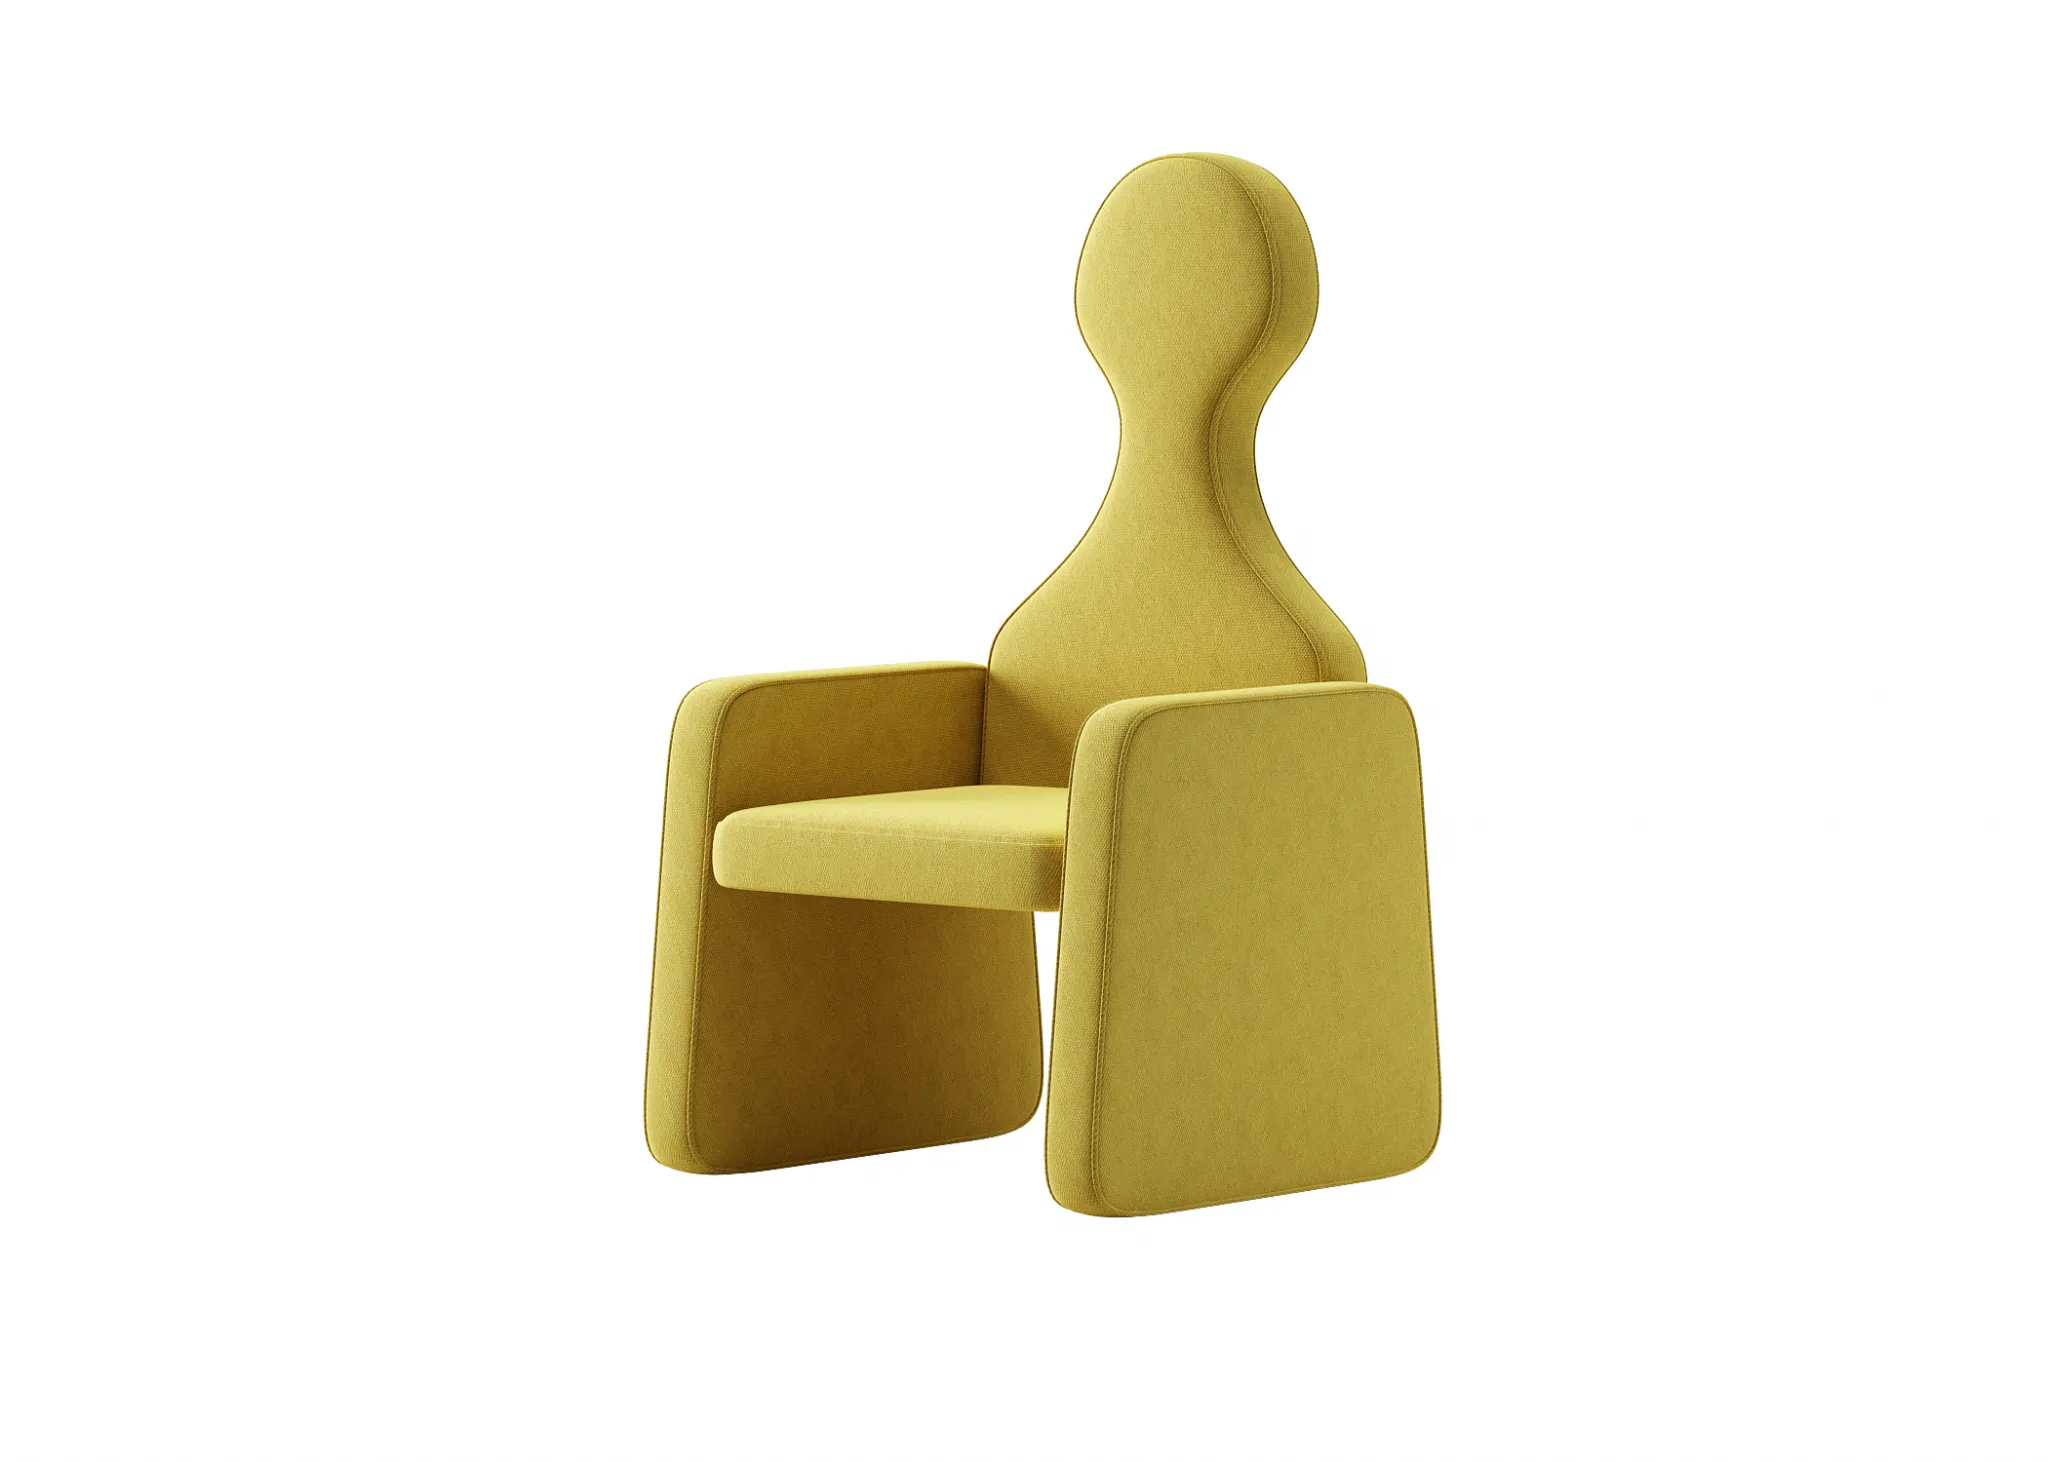 FURNITURE 3D MODELS – CHAIRS – 0030